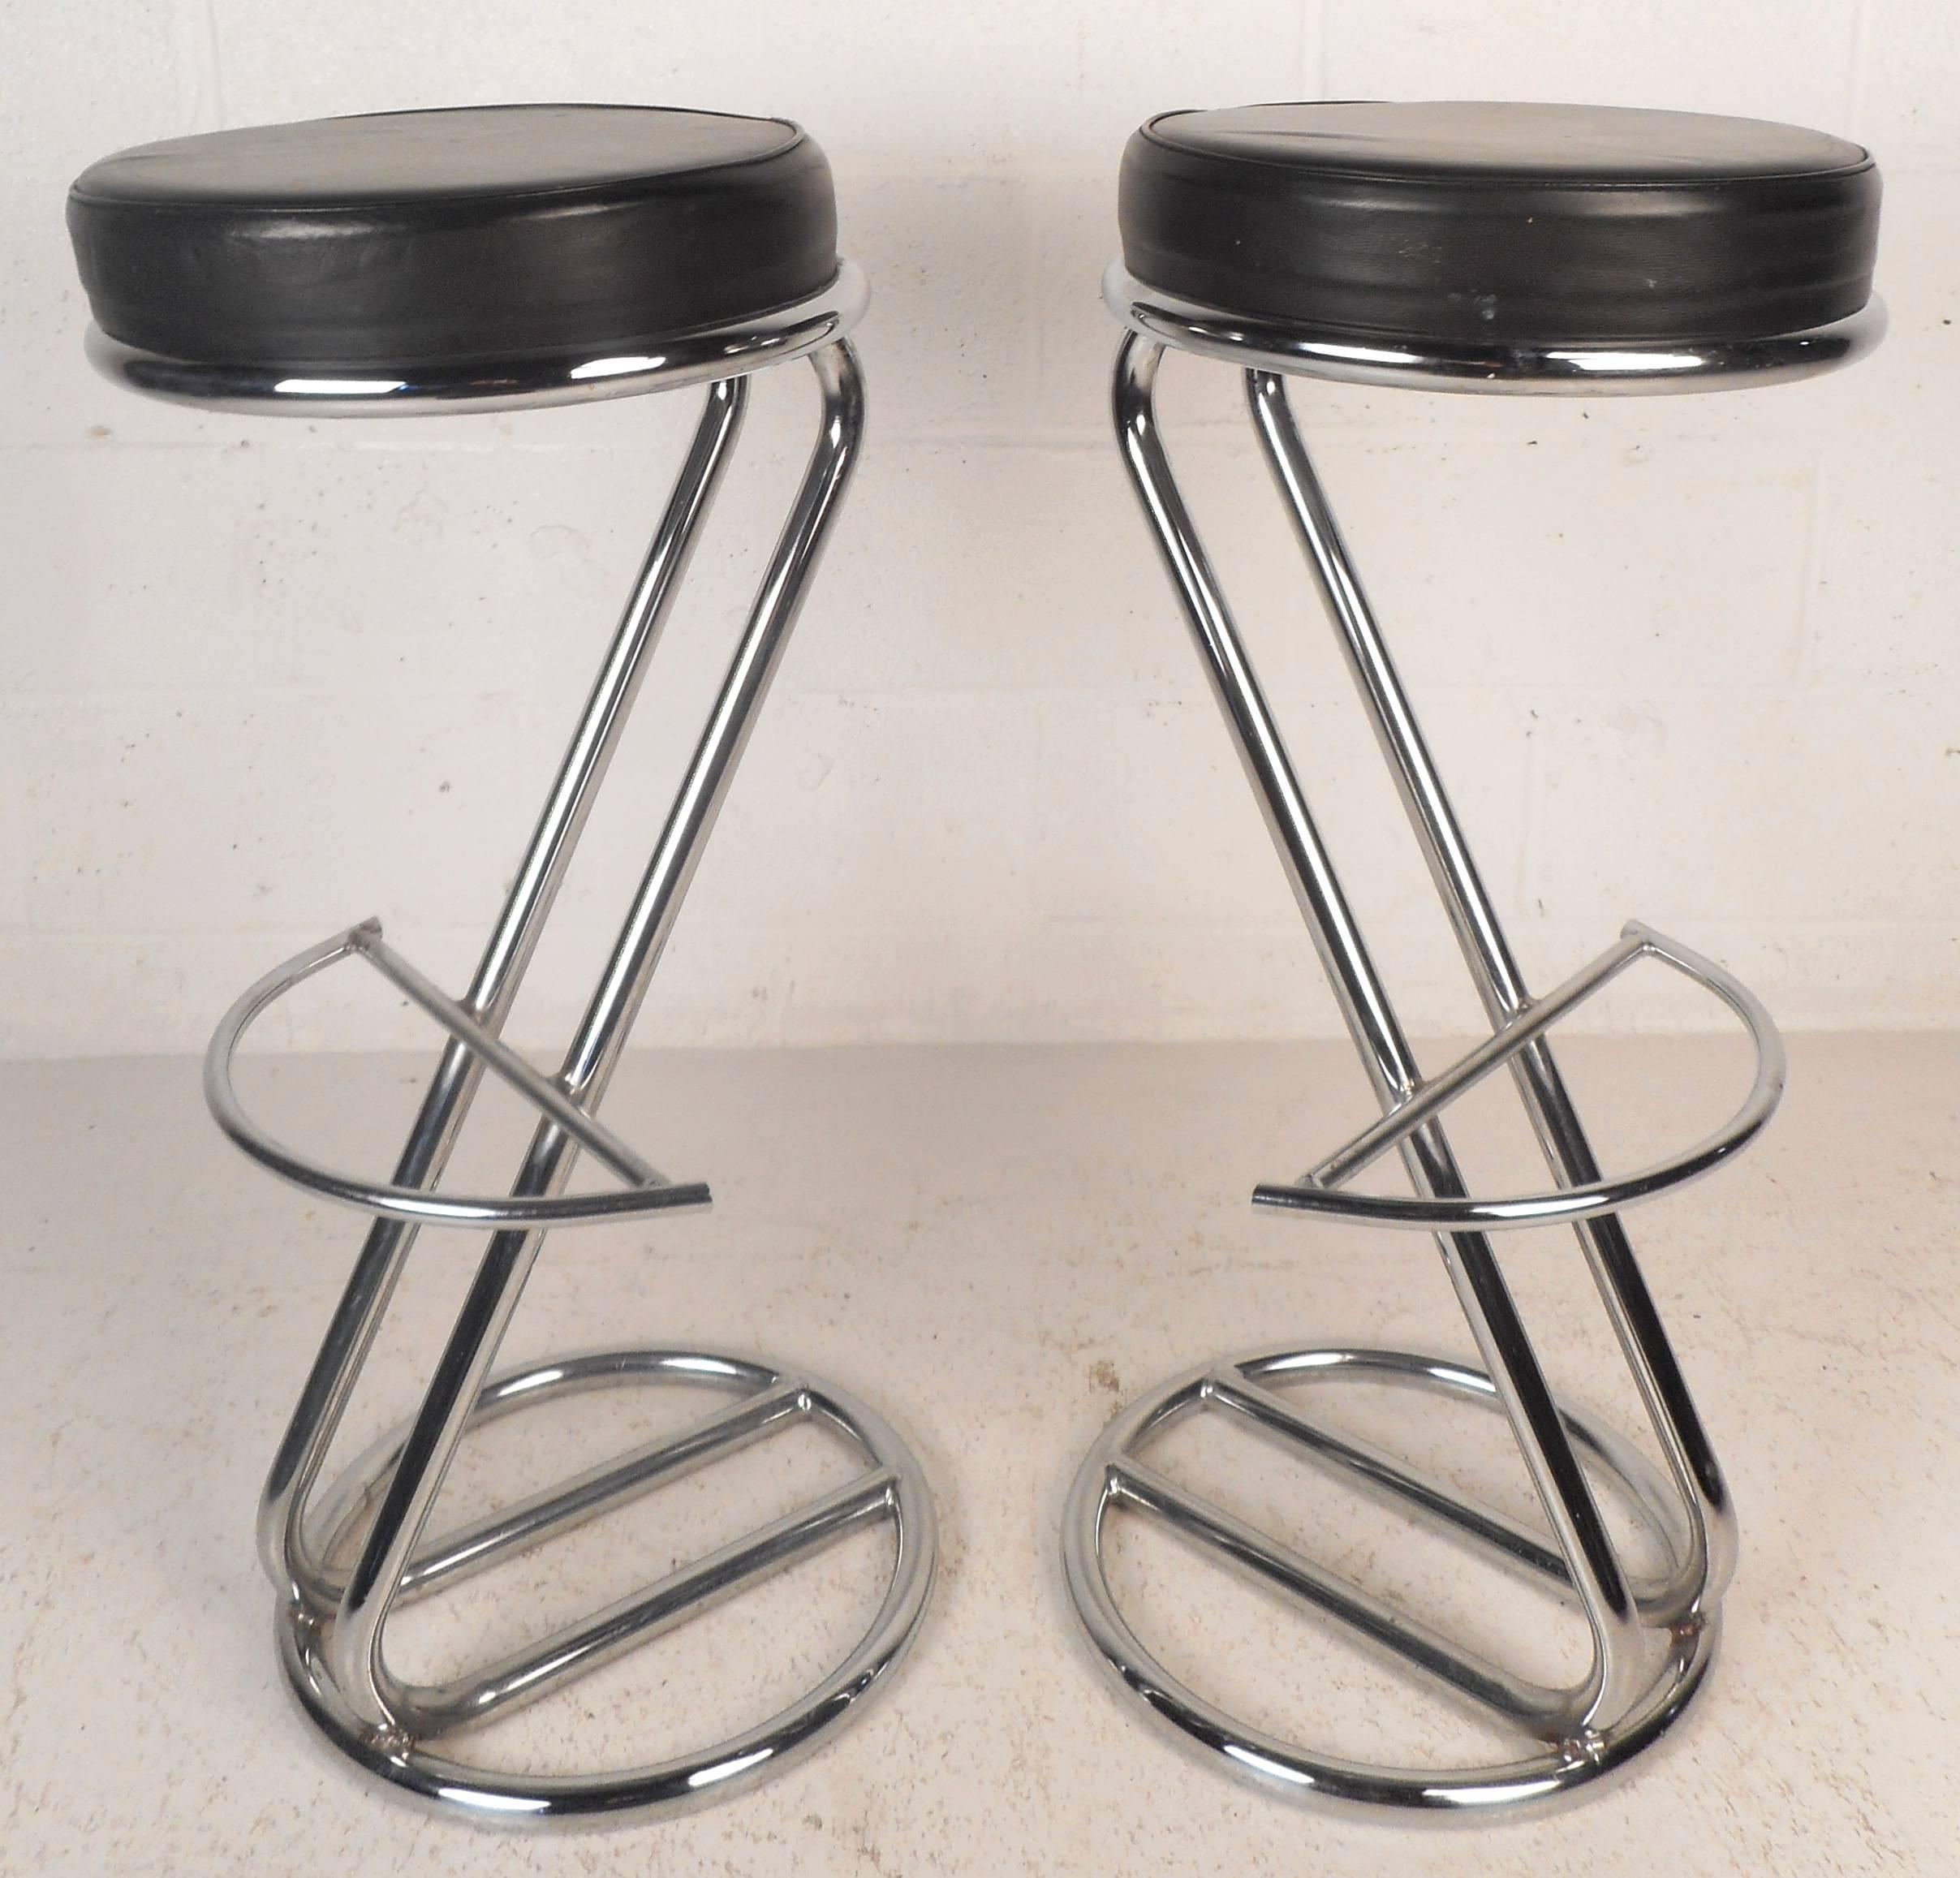 This beautiful pair of vintage modern cantilever bar stools feature tubular chrome bases. Elegant floating top design with round black leather seats and a unique eclipse kick rest. This stunning Mid-Century pair of stools are sure to compliment any